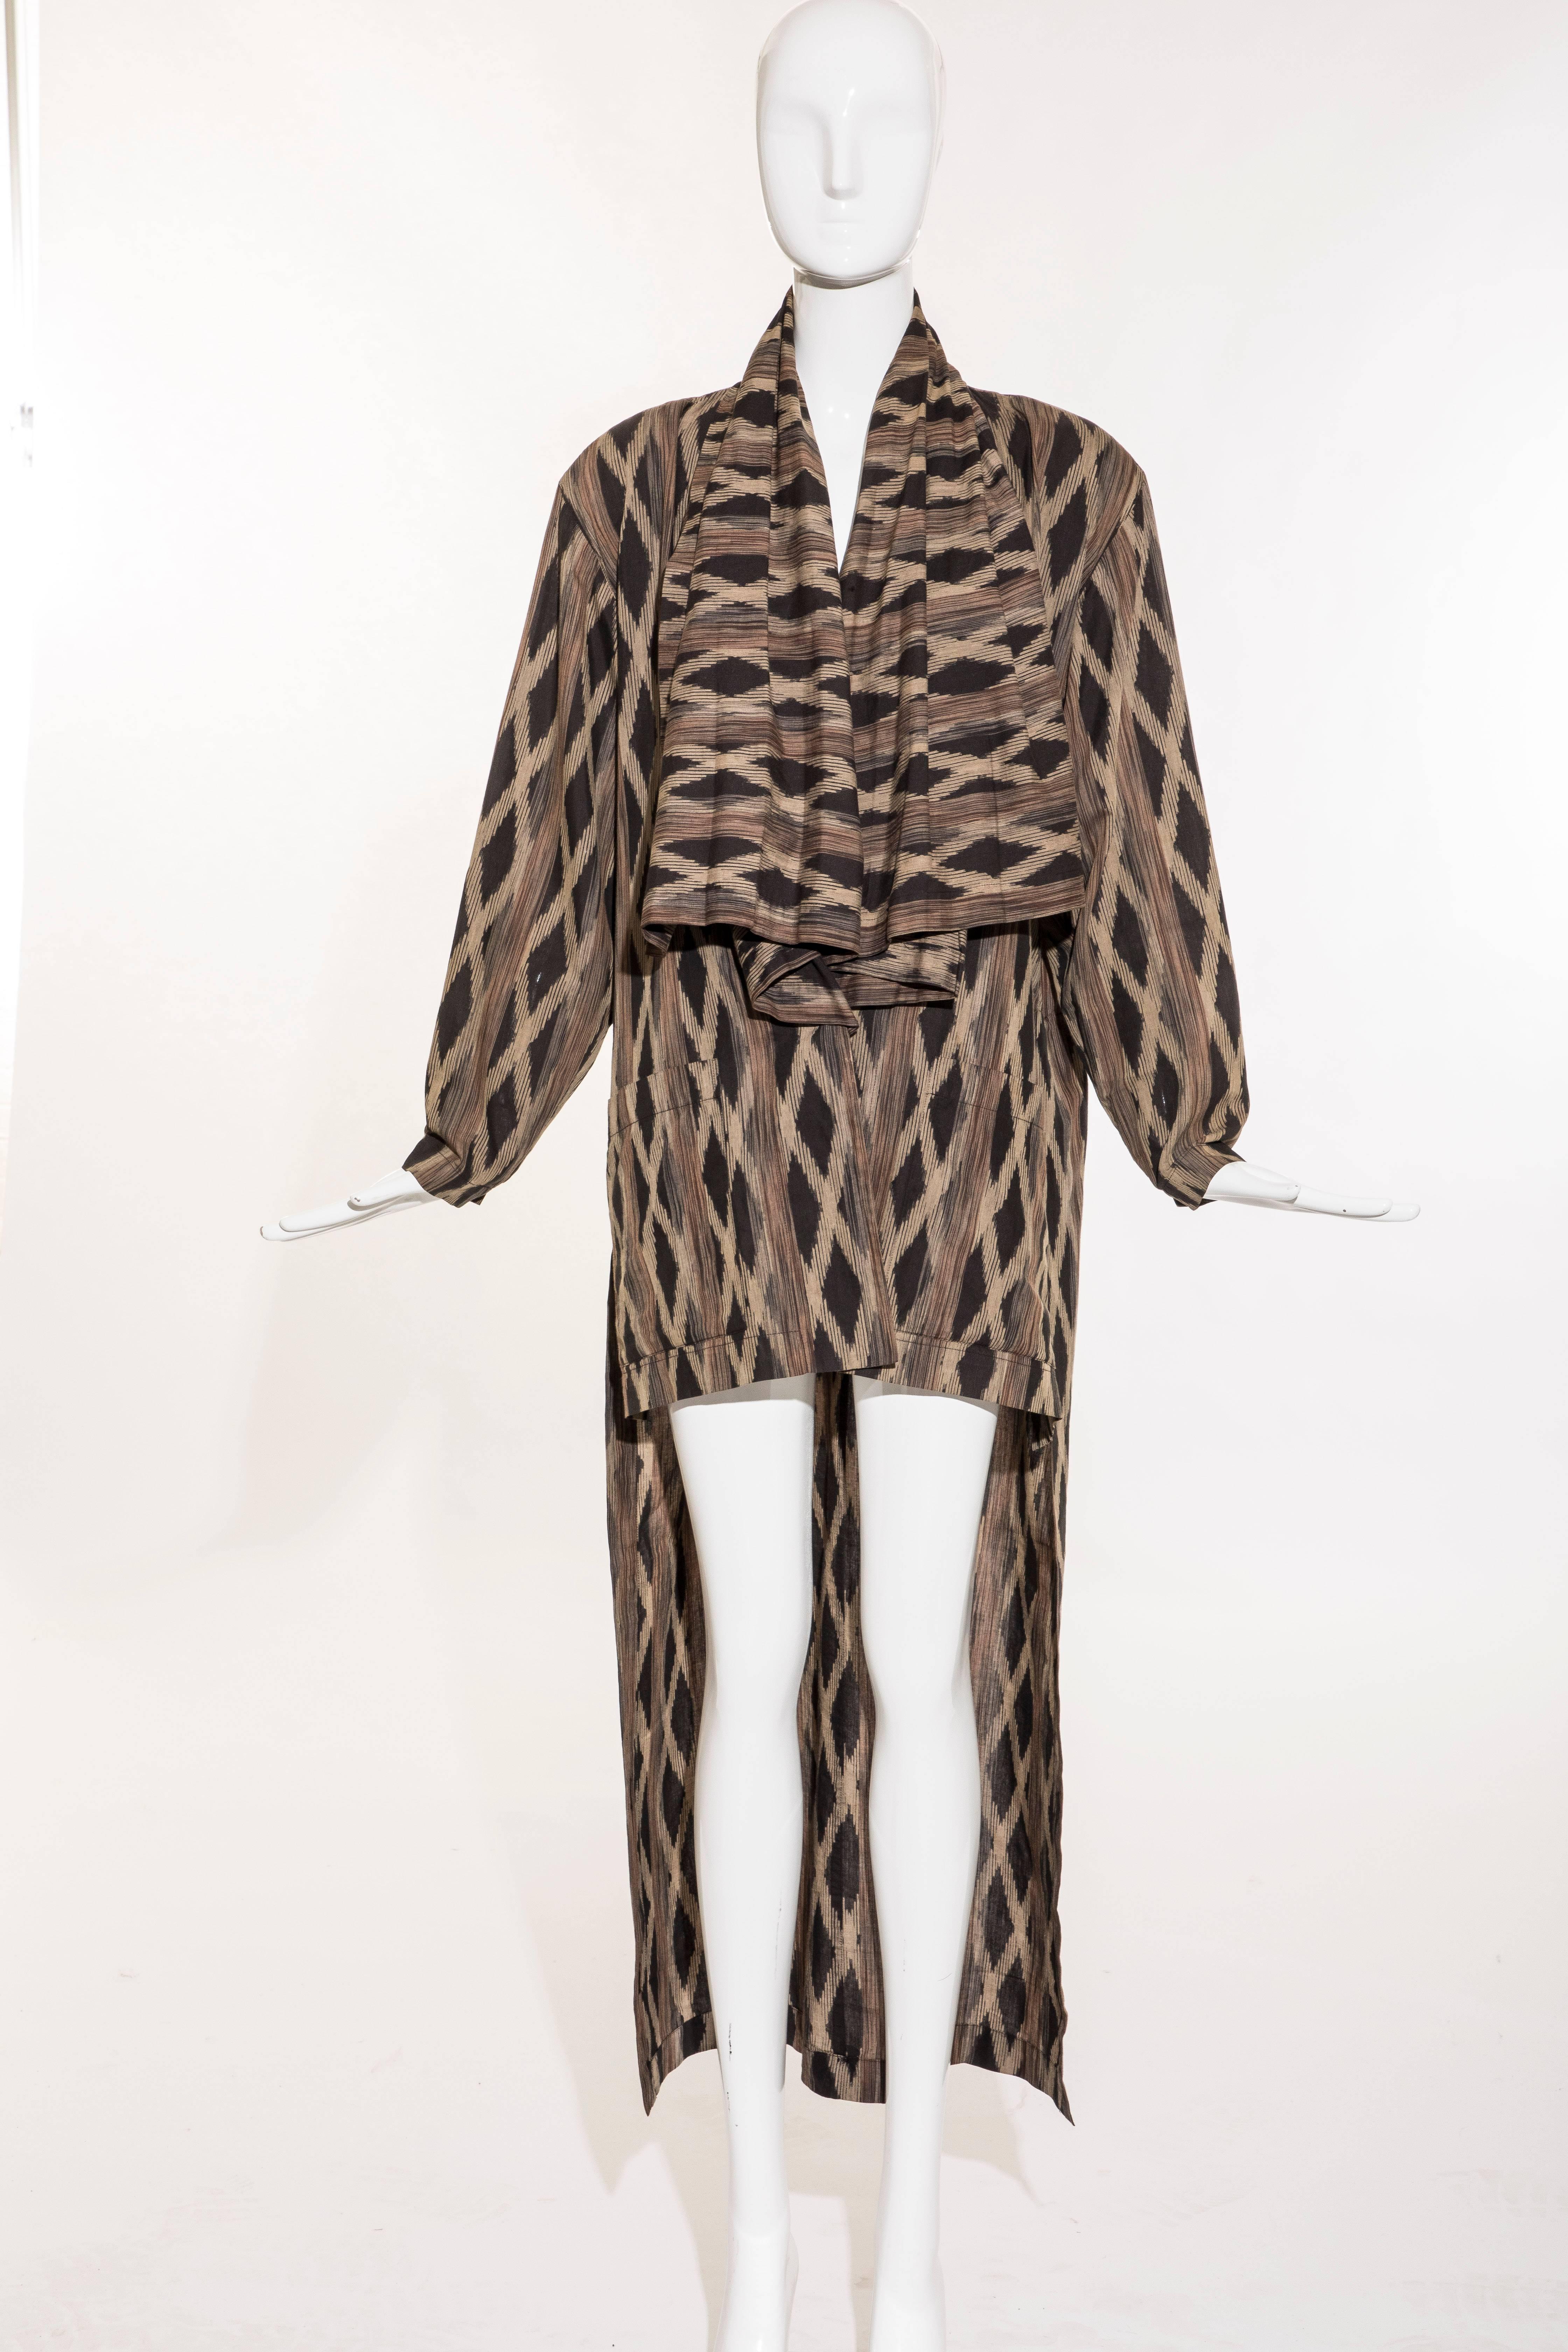 Issey Miyake, Fall 1986 cotton, silk, button front lattice weave  jacket and duster cardigan combination with shawl collar, long sleeves, large patch pocket, shoulder pads, interior buttons to each side and the back to make the back panel into a